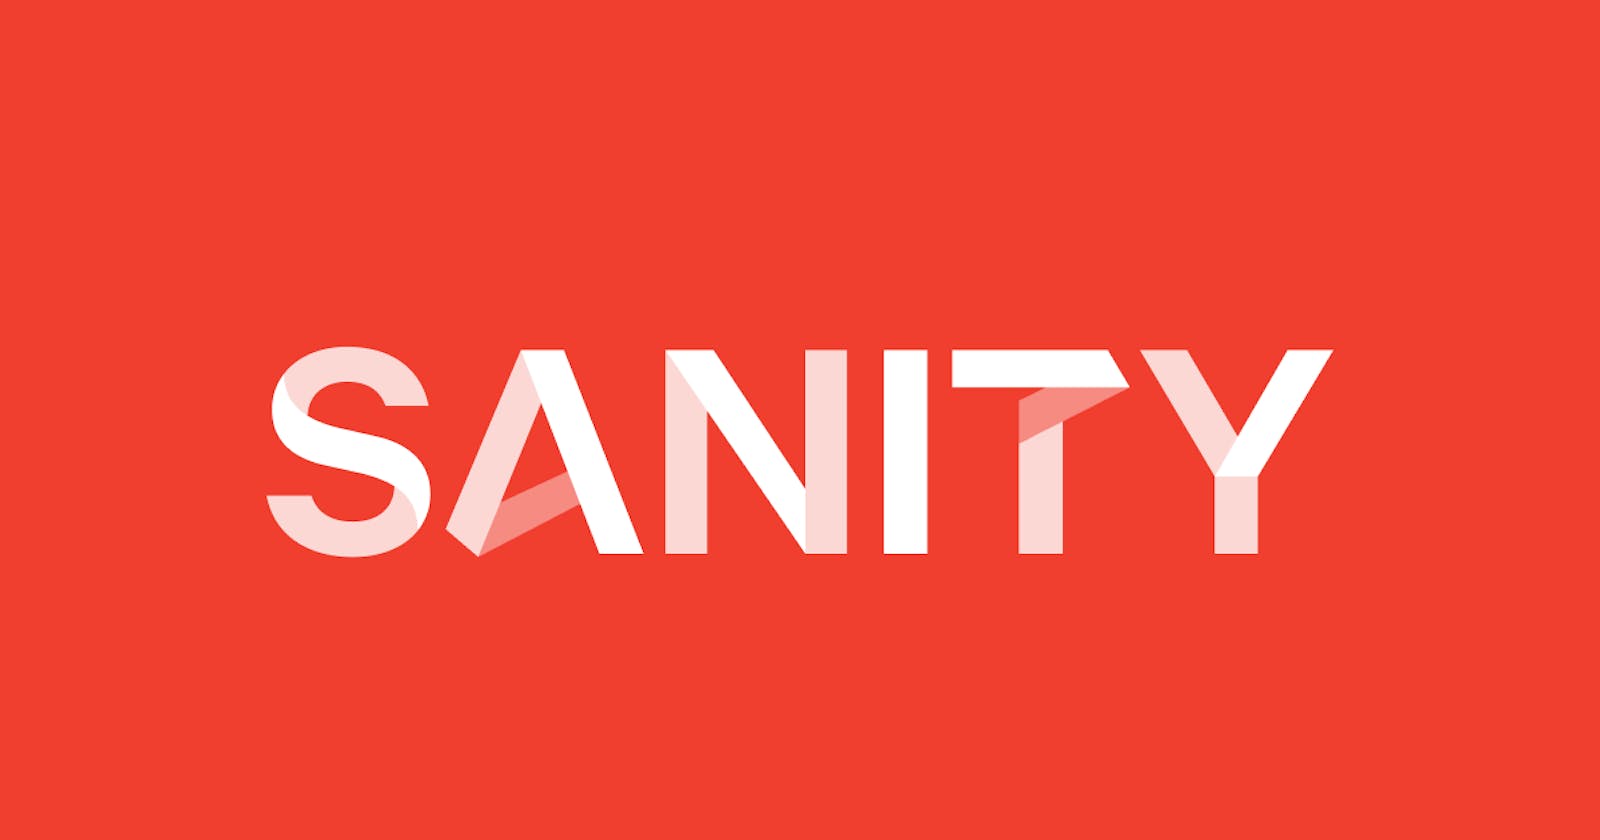 Using Sanity Cms to allow your web design clients to change their website themselves just like Wordpress